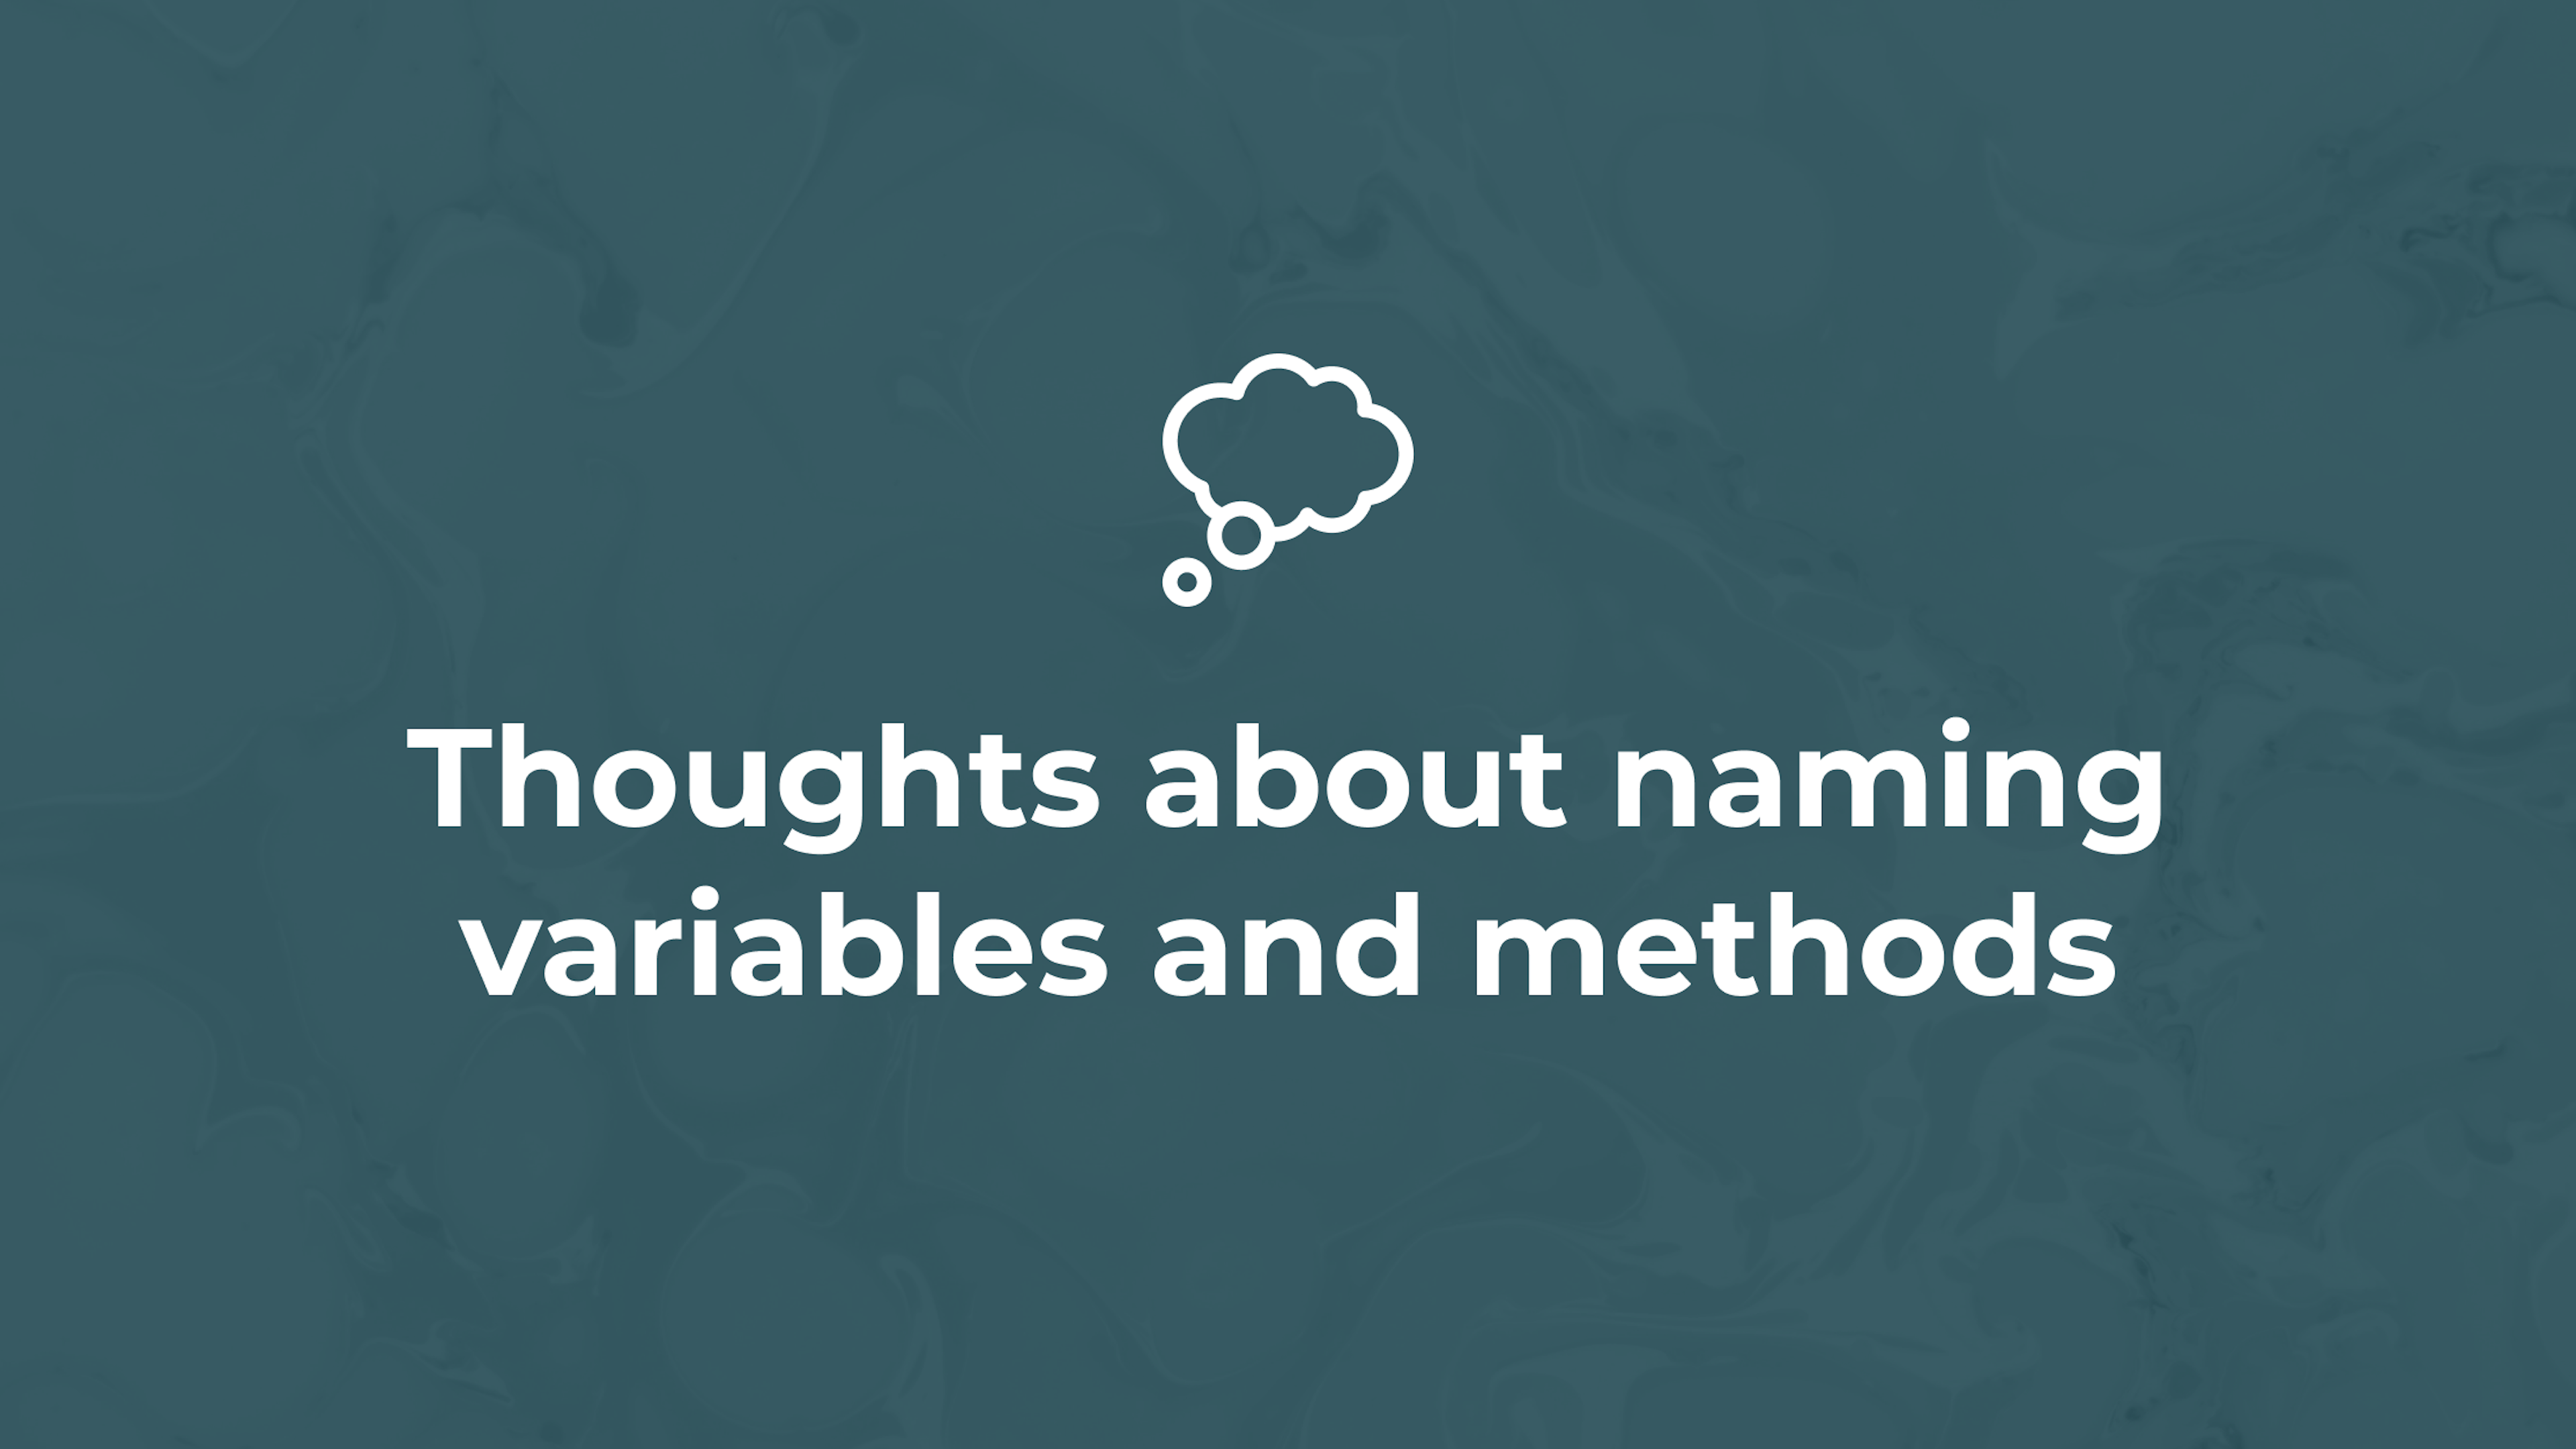 Thoughts about naming variables and methods